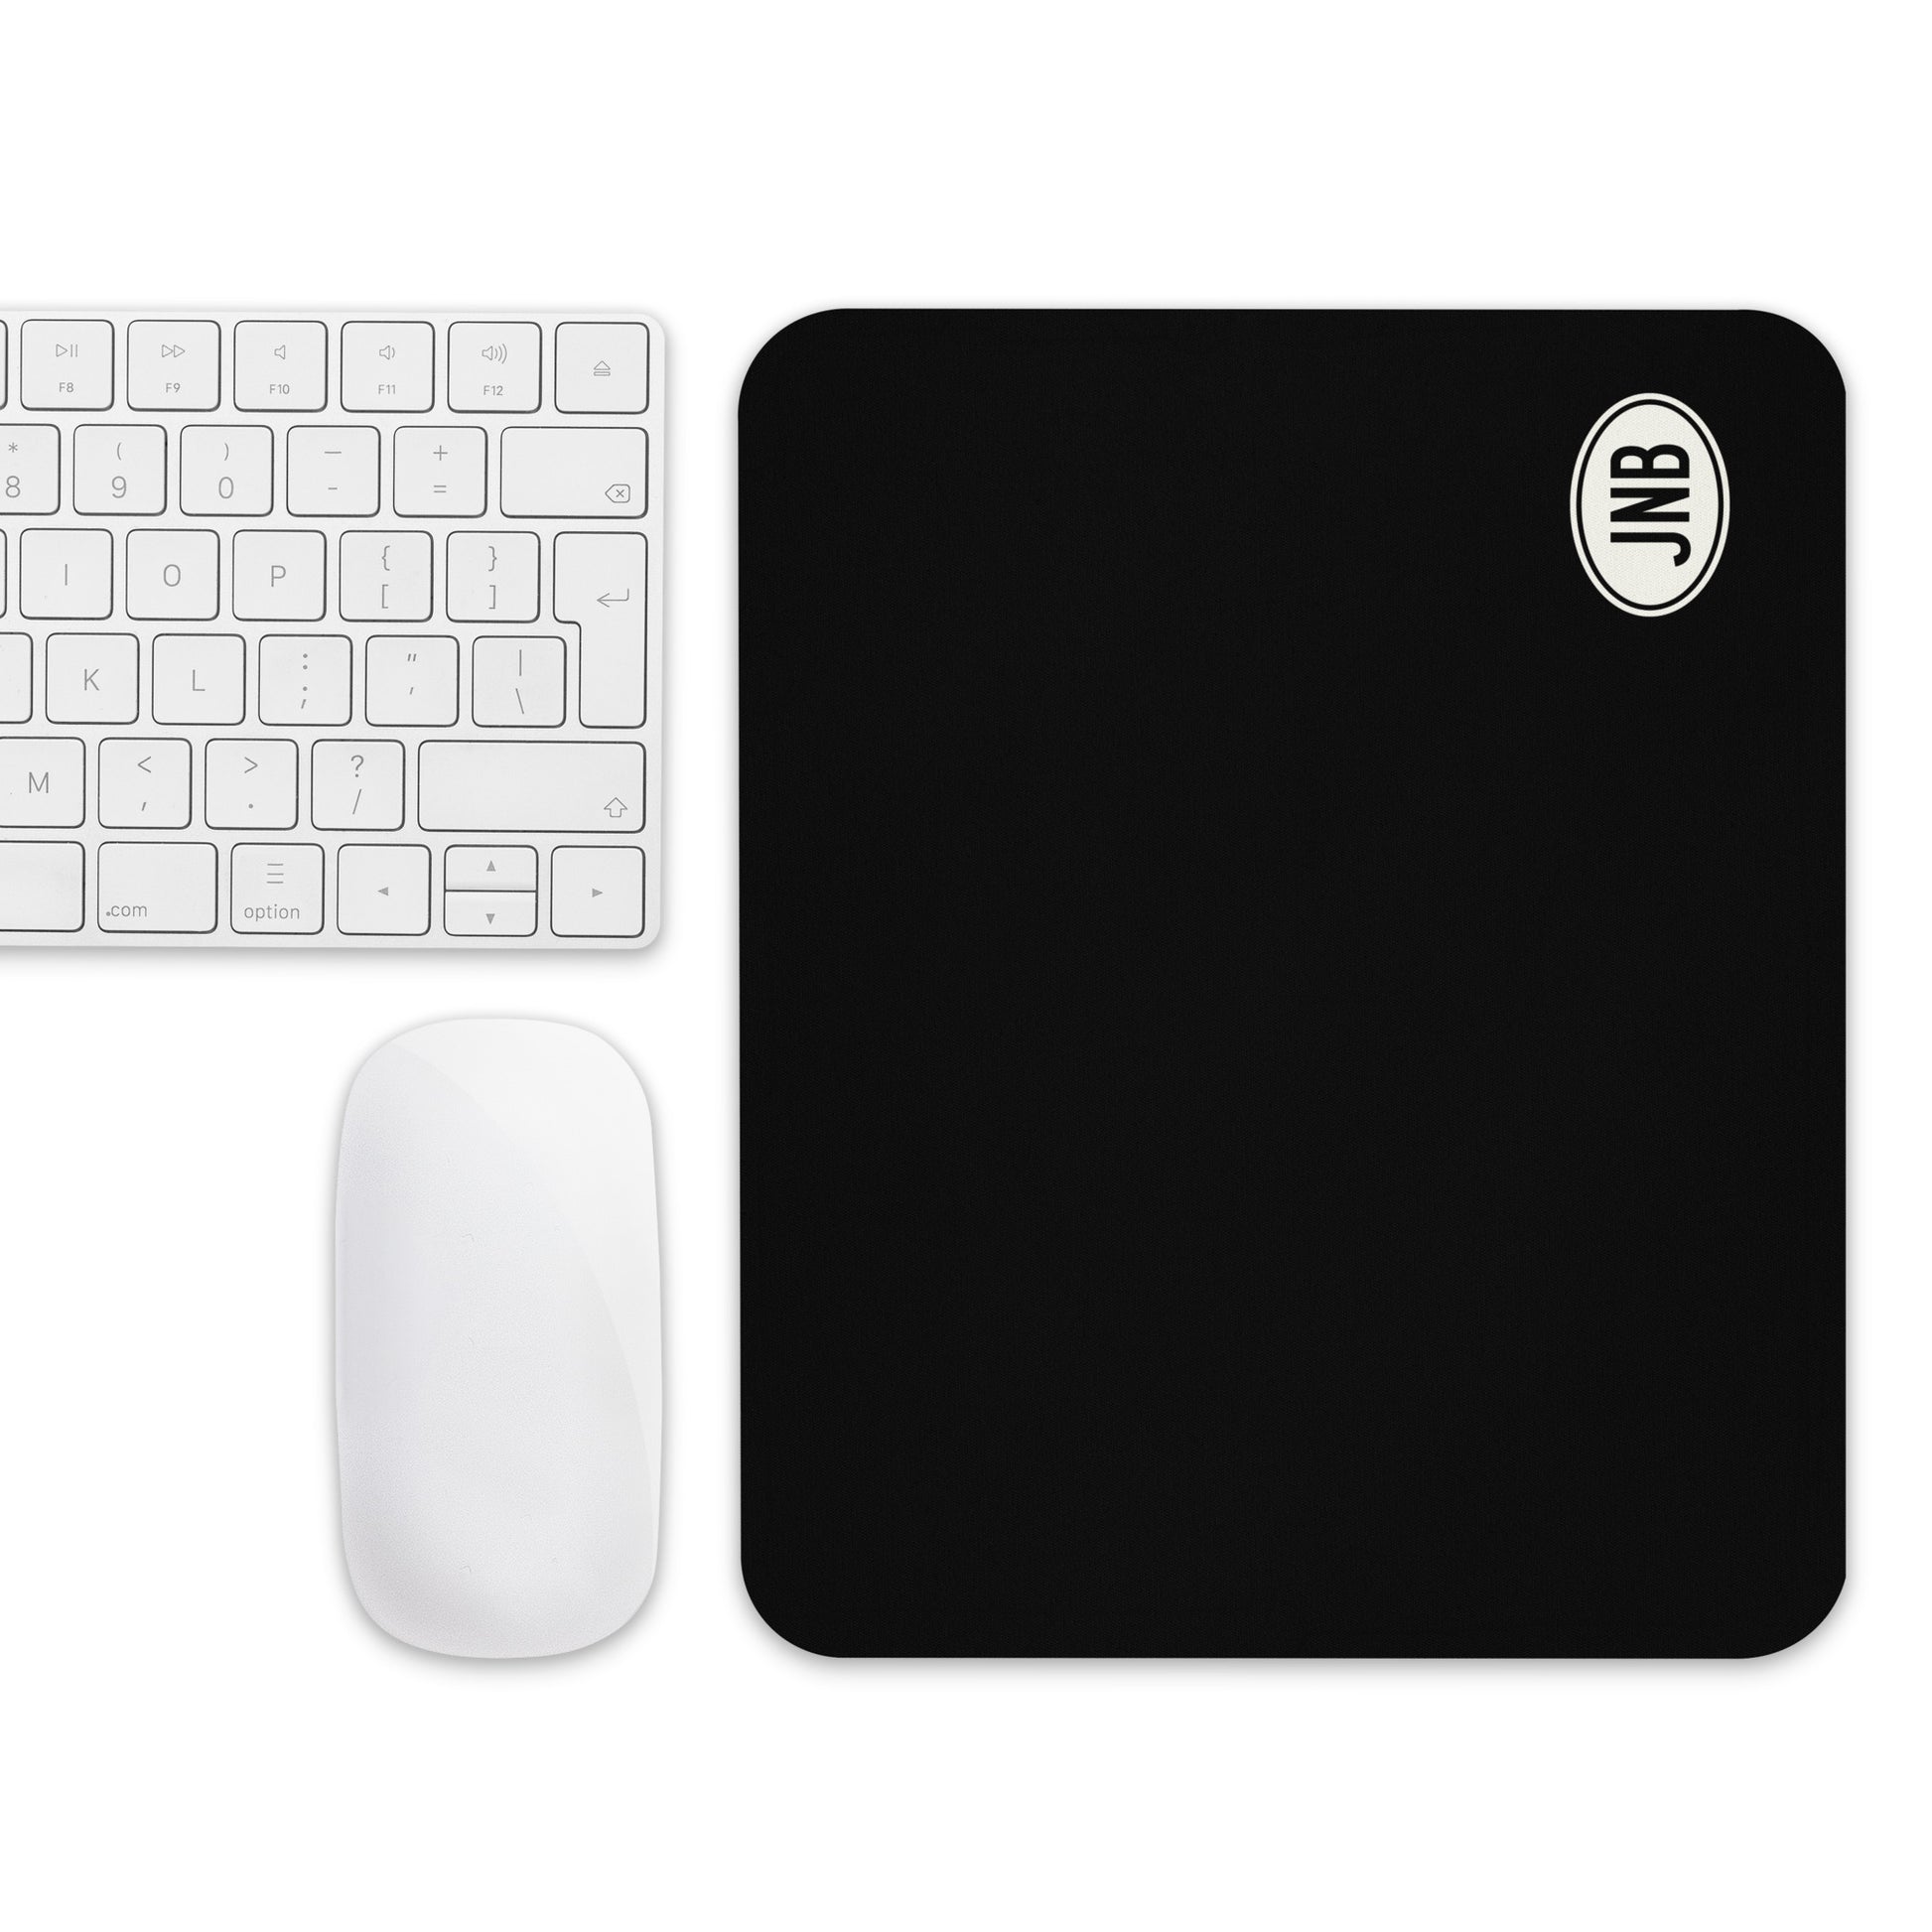 Unique Travel Gift Mouse Pad - White Oval • JNB Johannesburg • YHM Designs - Image 04